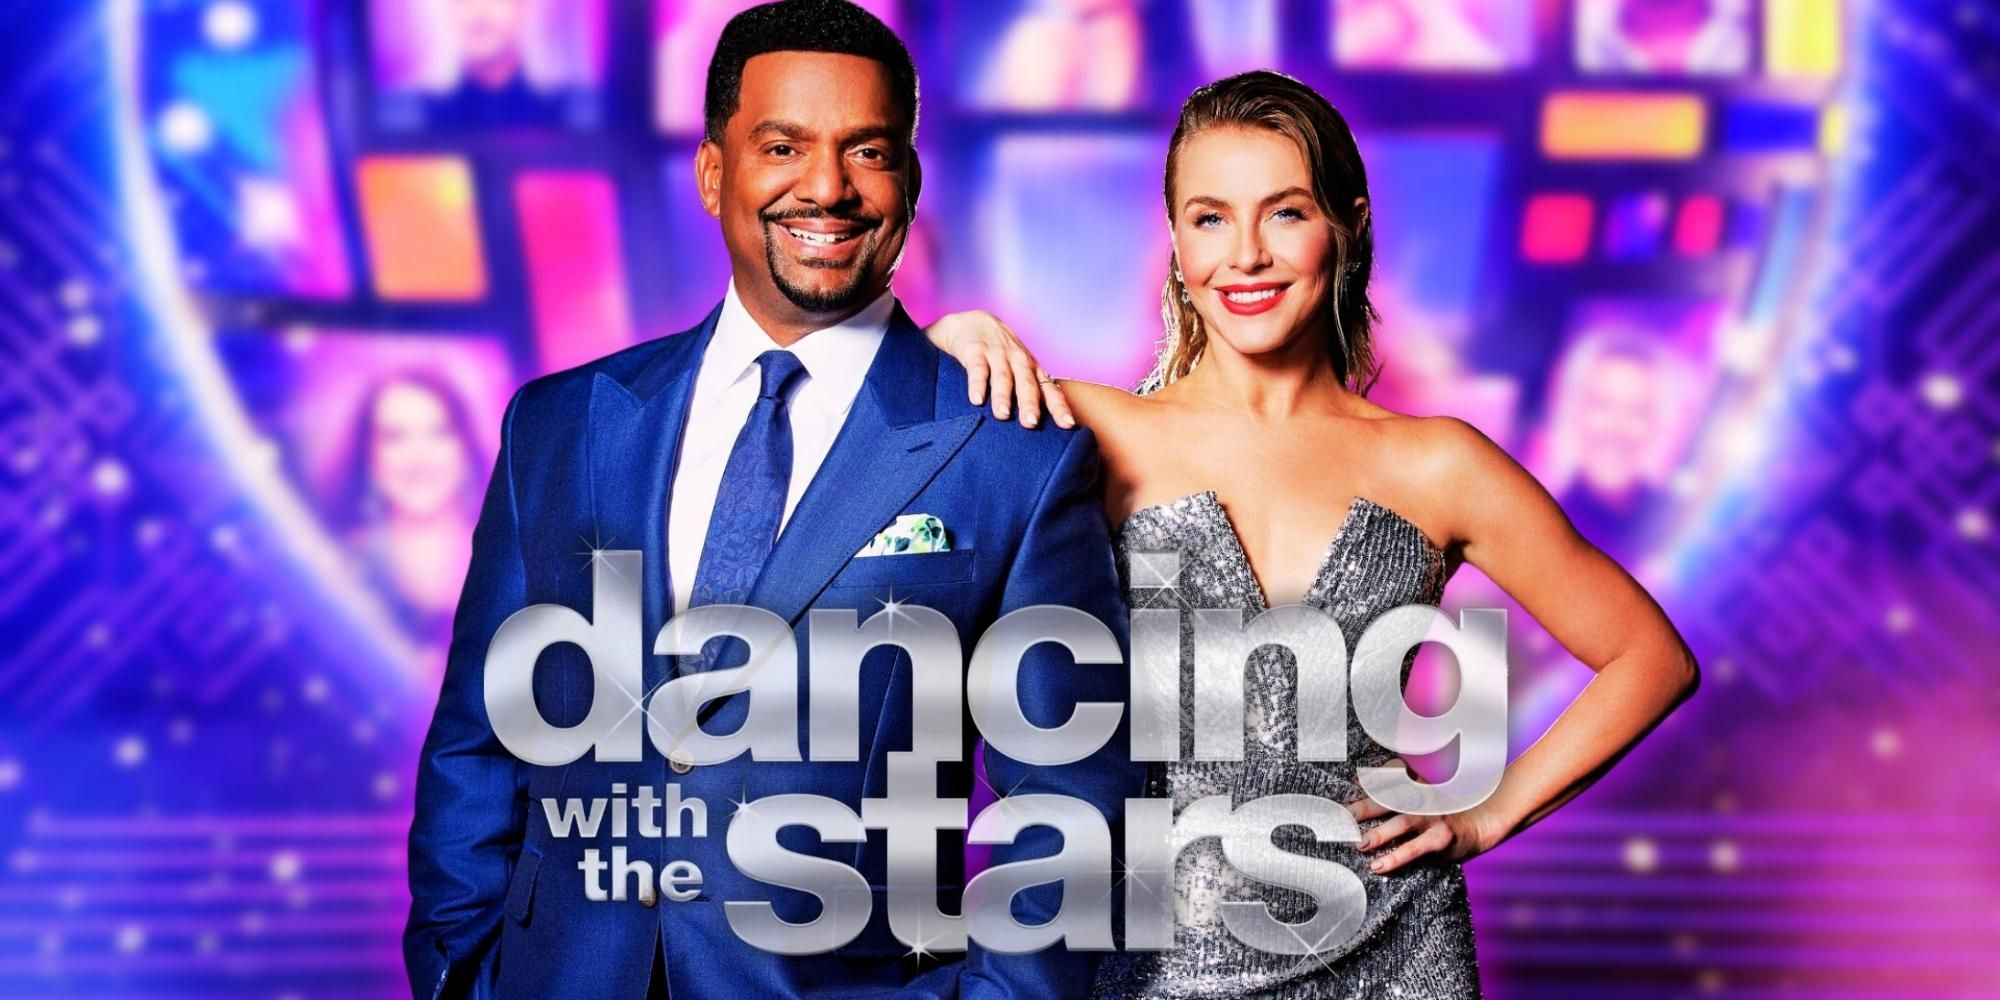 Alfonso Ribeiro with Julianne Hough who will be co-hosting Dancing With The Stars Season 32